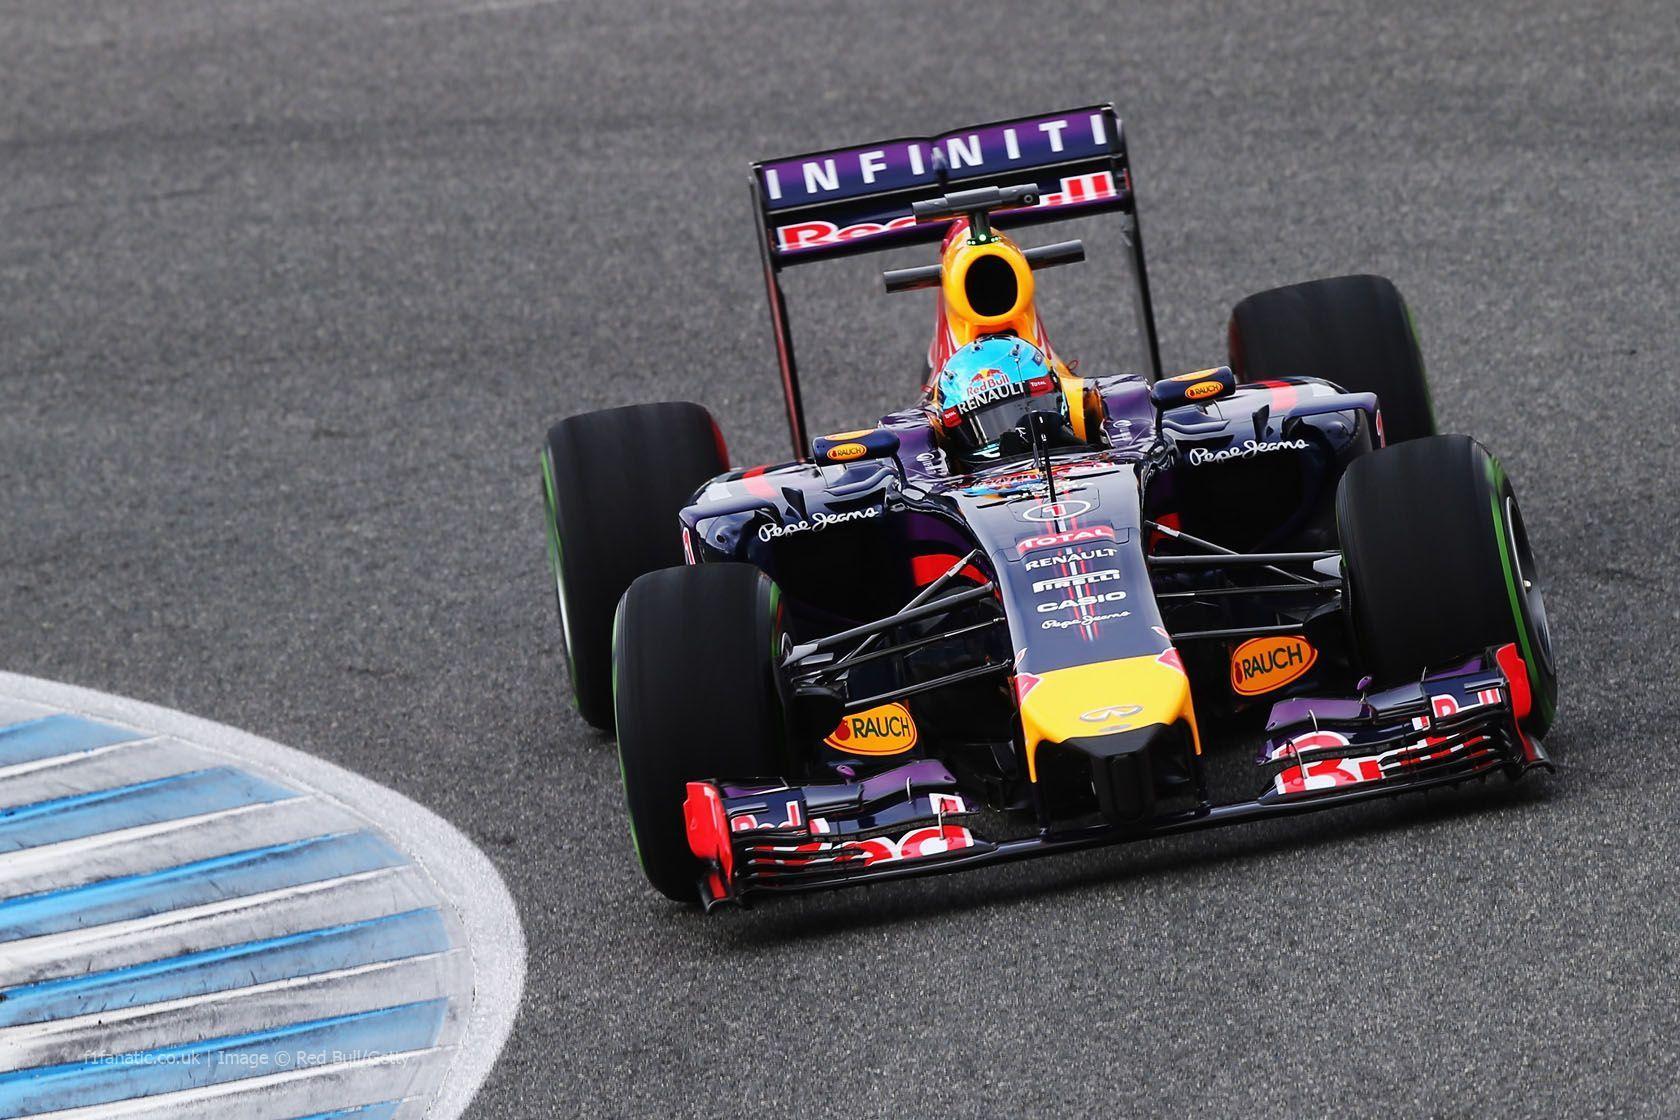 Red Bull RB10 (2014) picture · F1 Fanatic